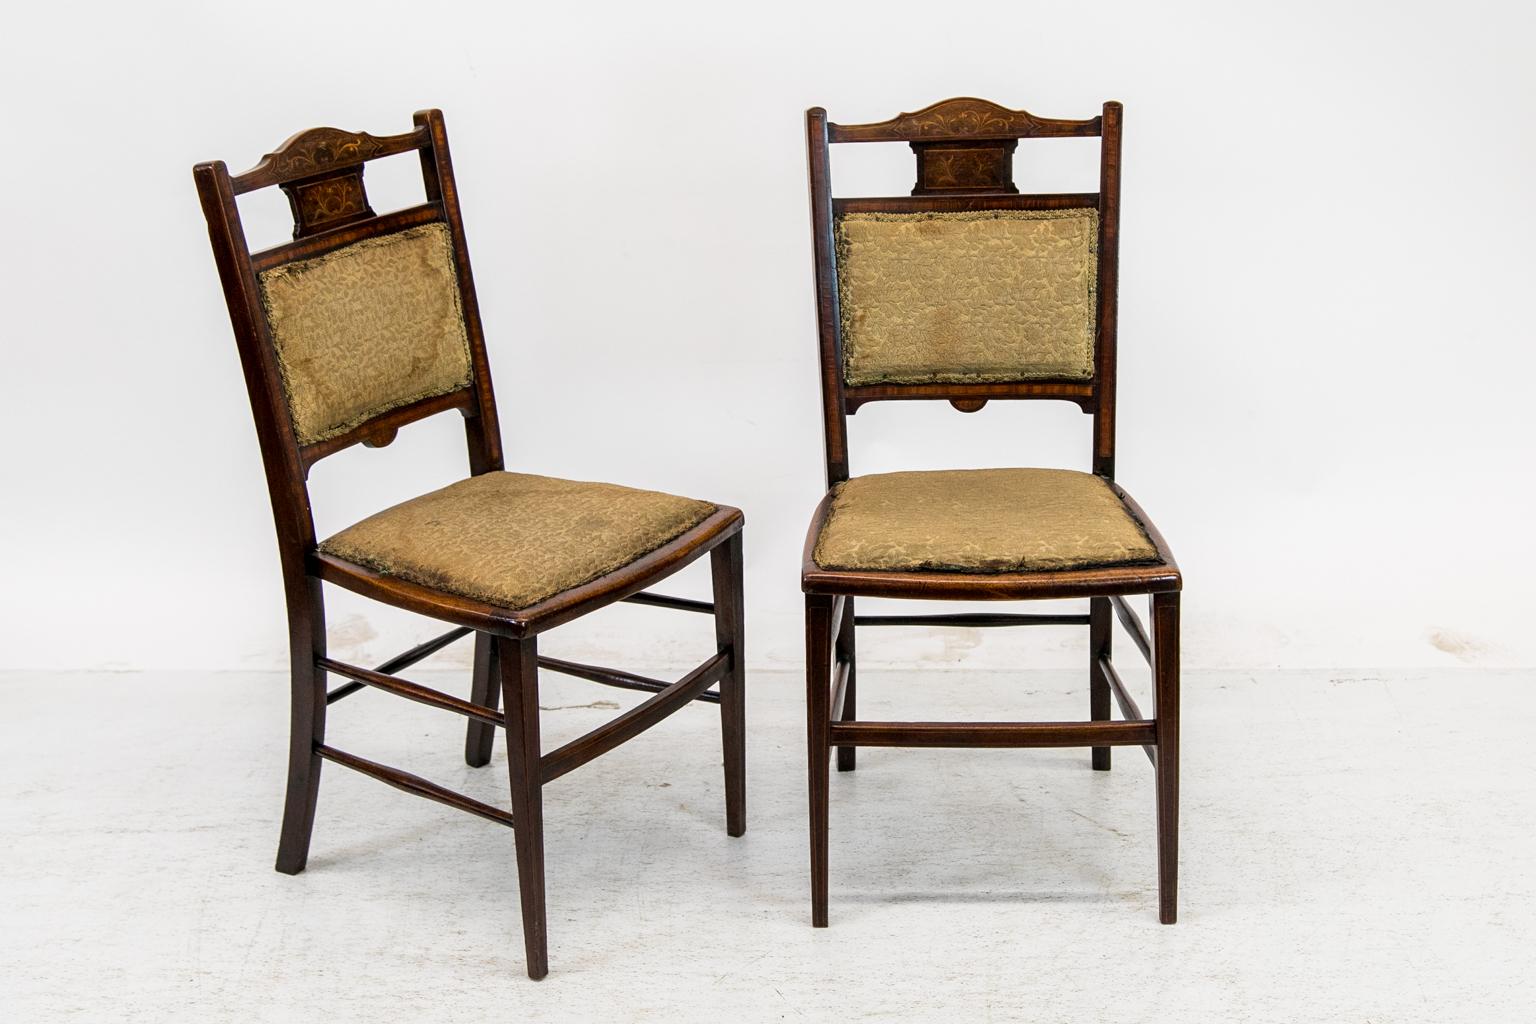 Pair of Inlaid Edwardian Chairs 1